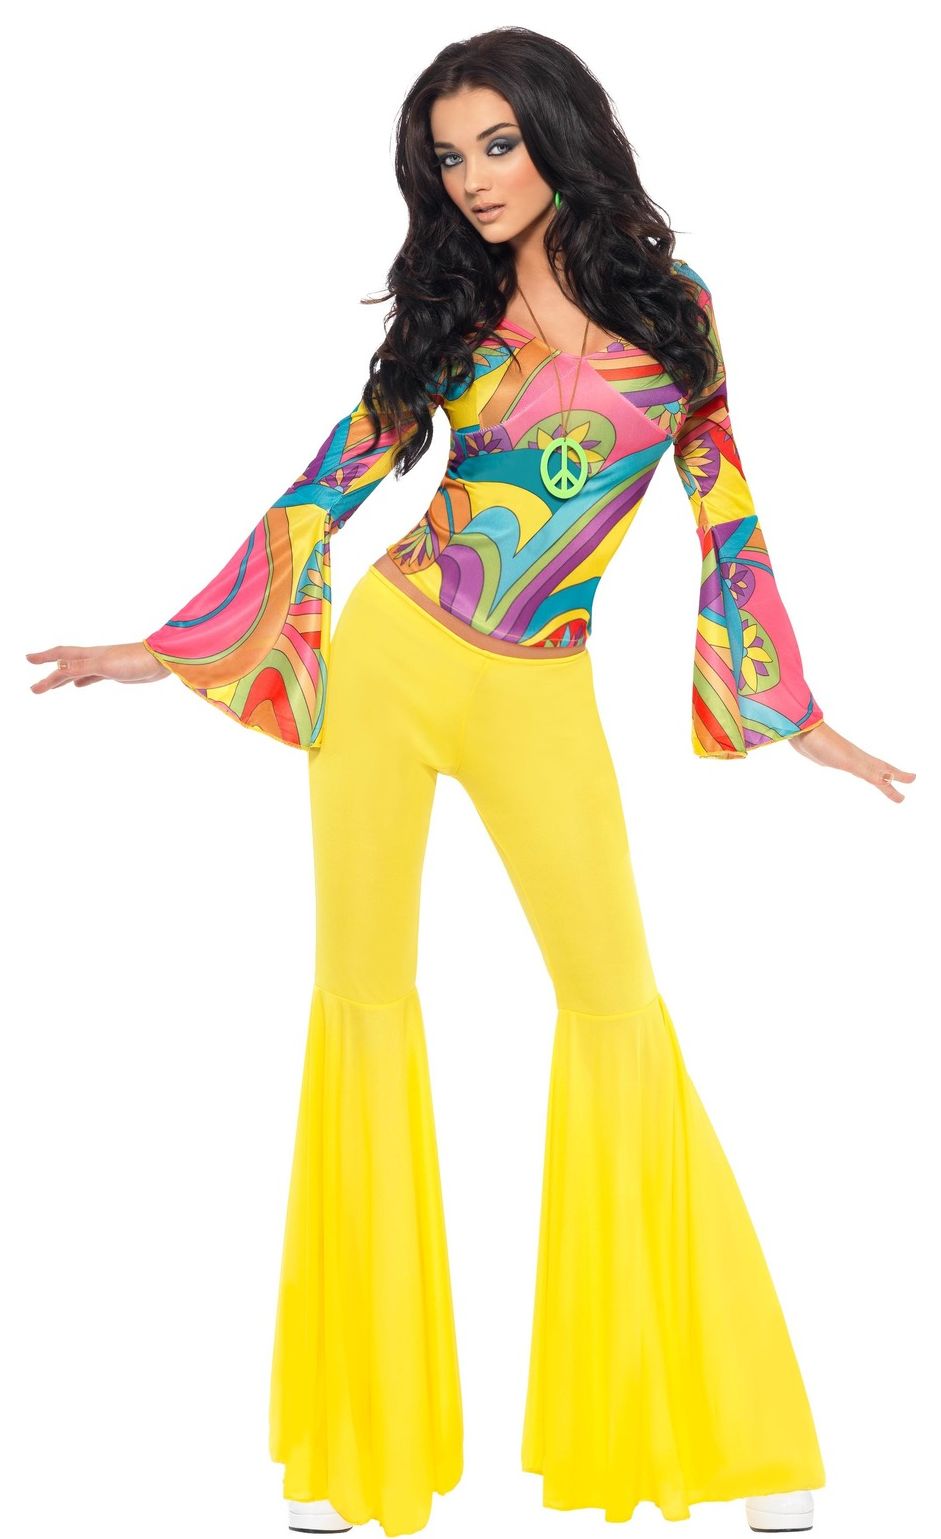 Groovy dames outfit